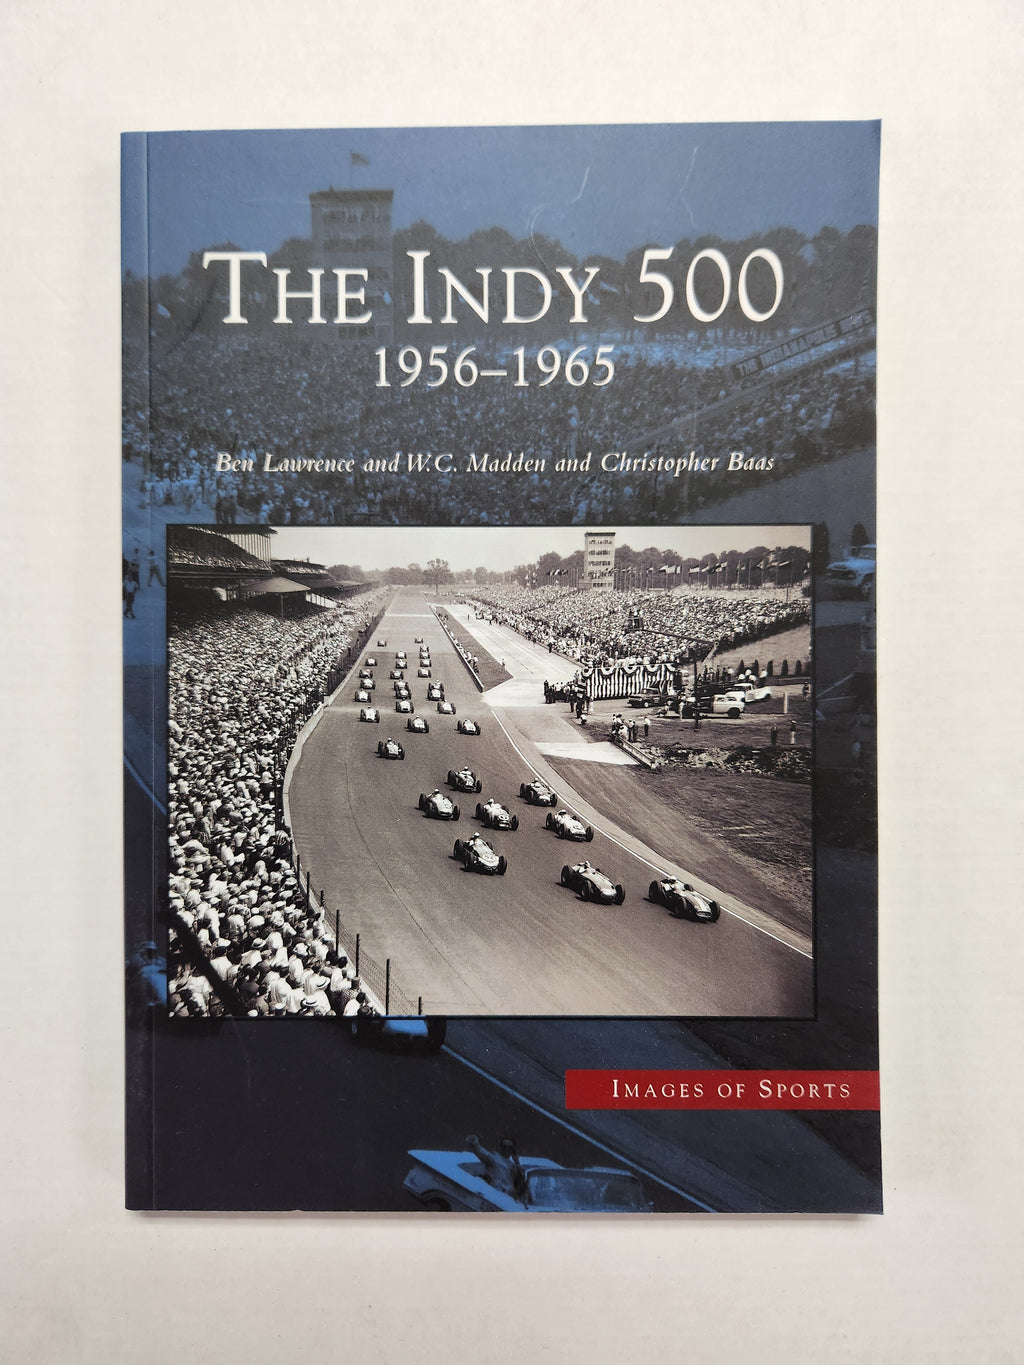 The Indy 500 Book 1956-1965